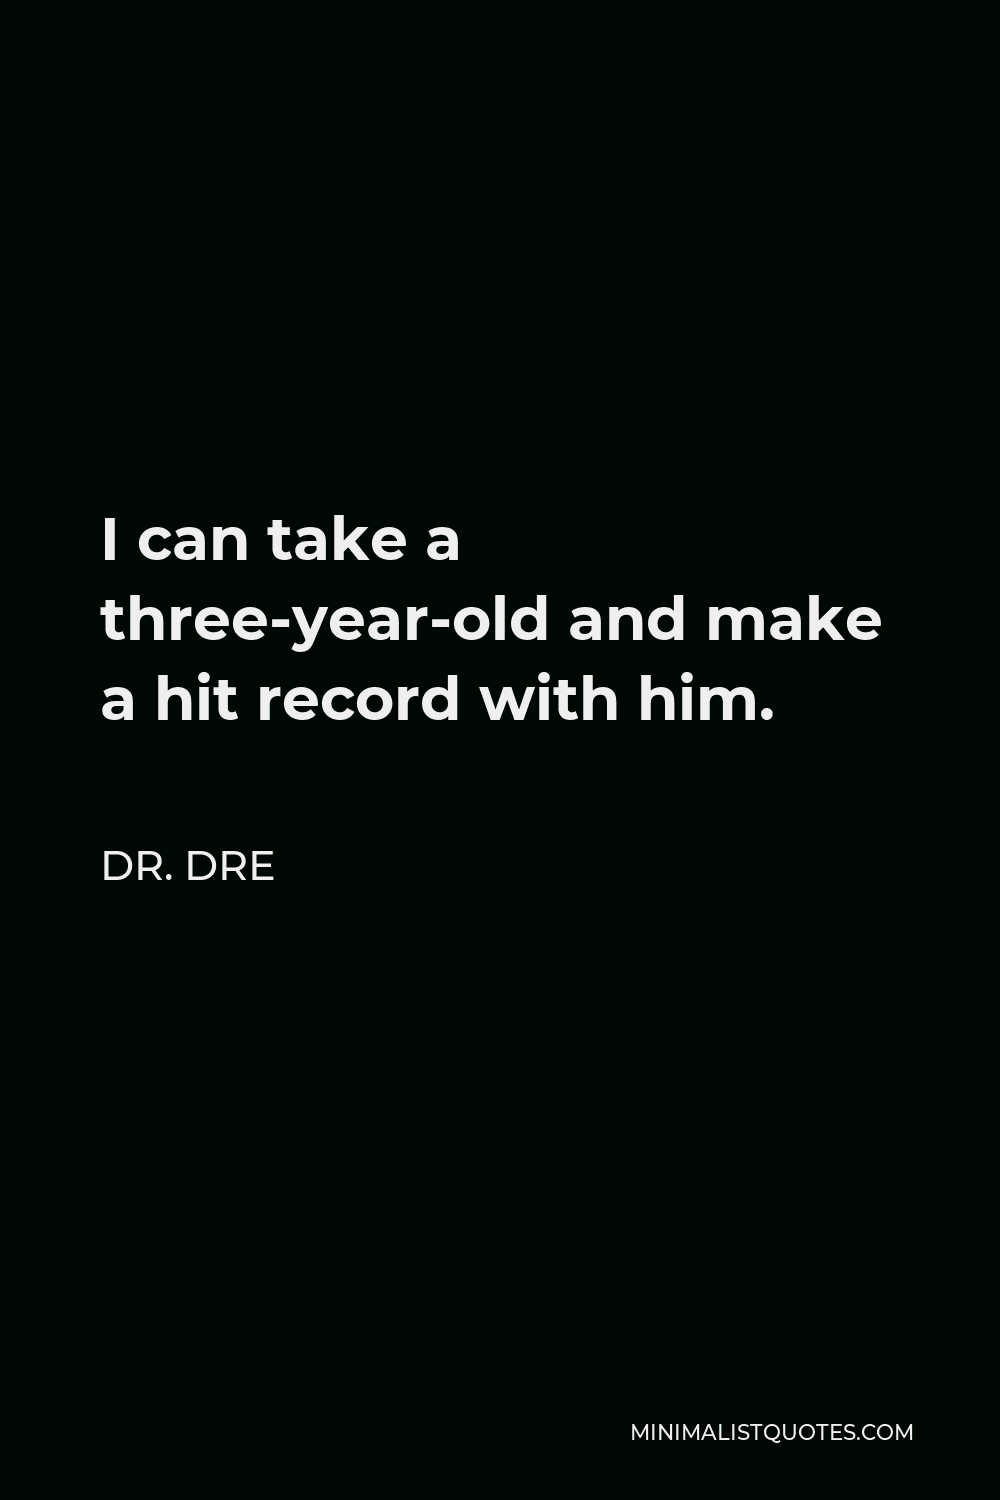 Dr. Dre Quote - I can take a three-year-old and make a hit record with him.